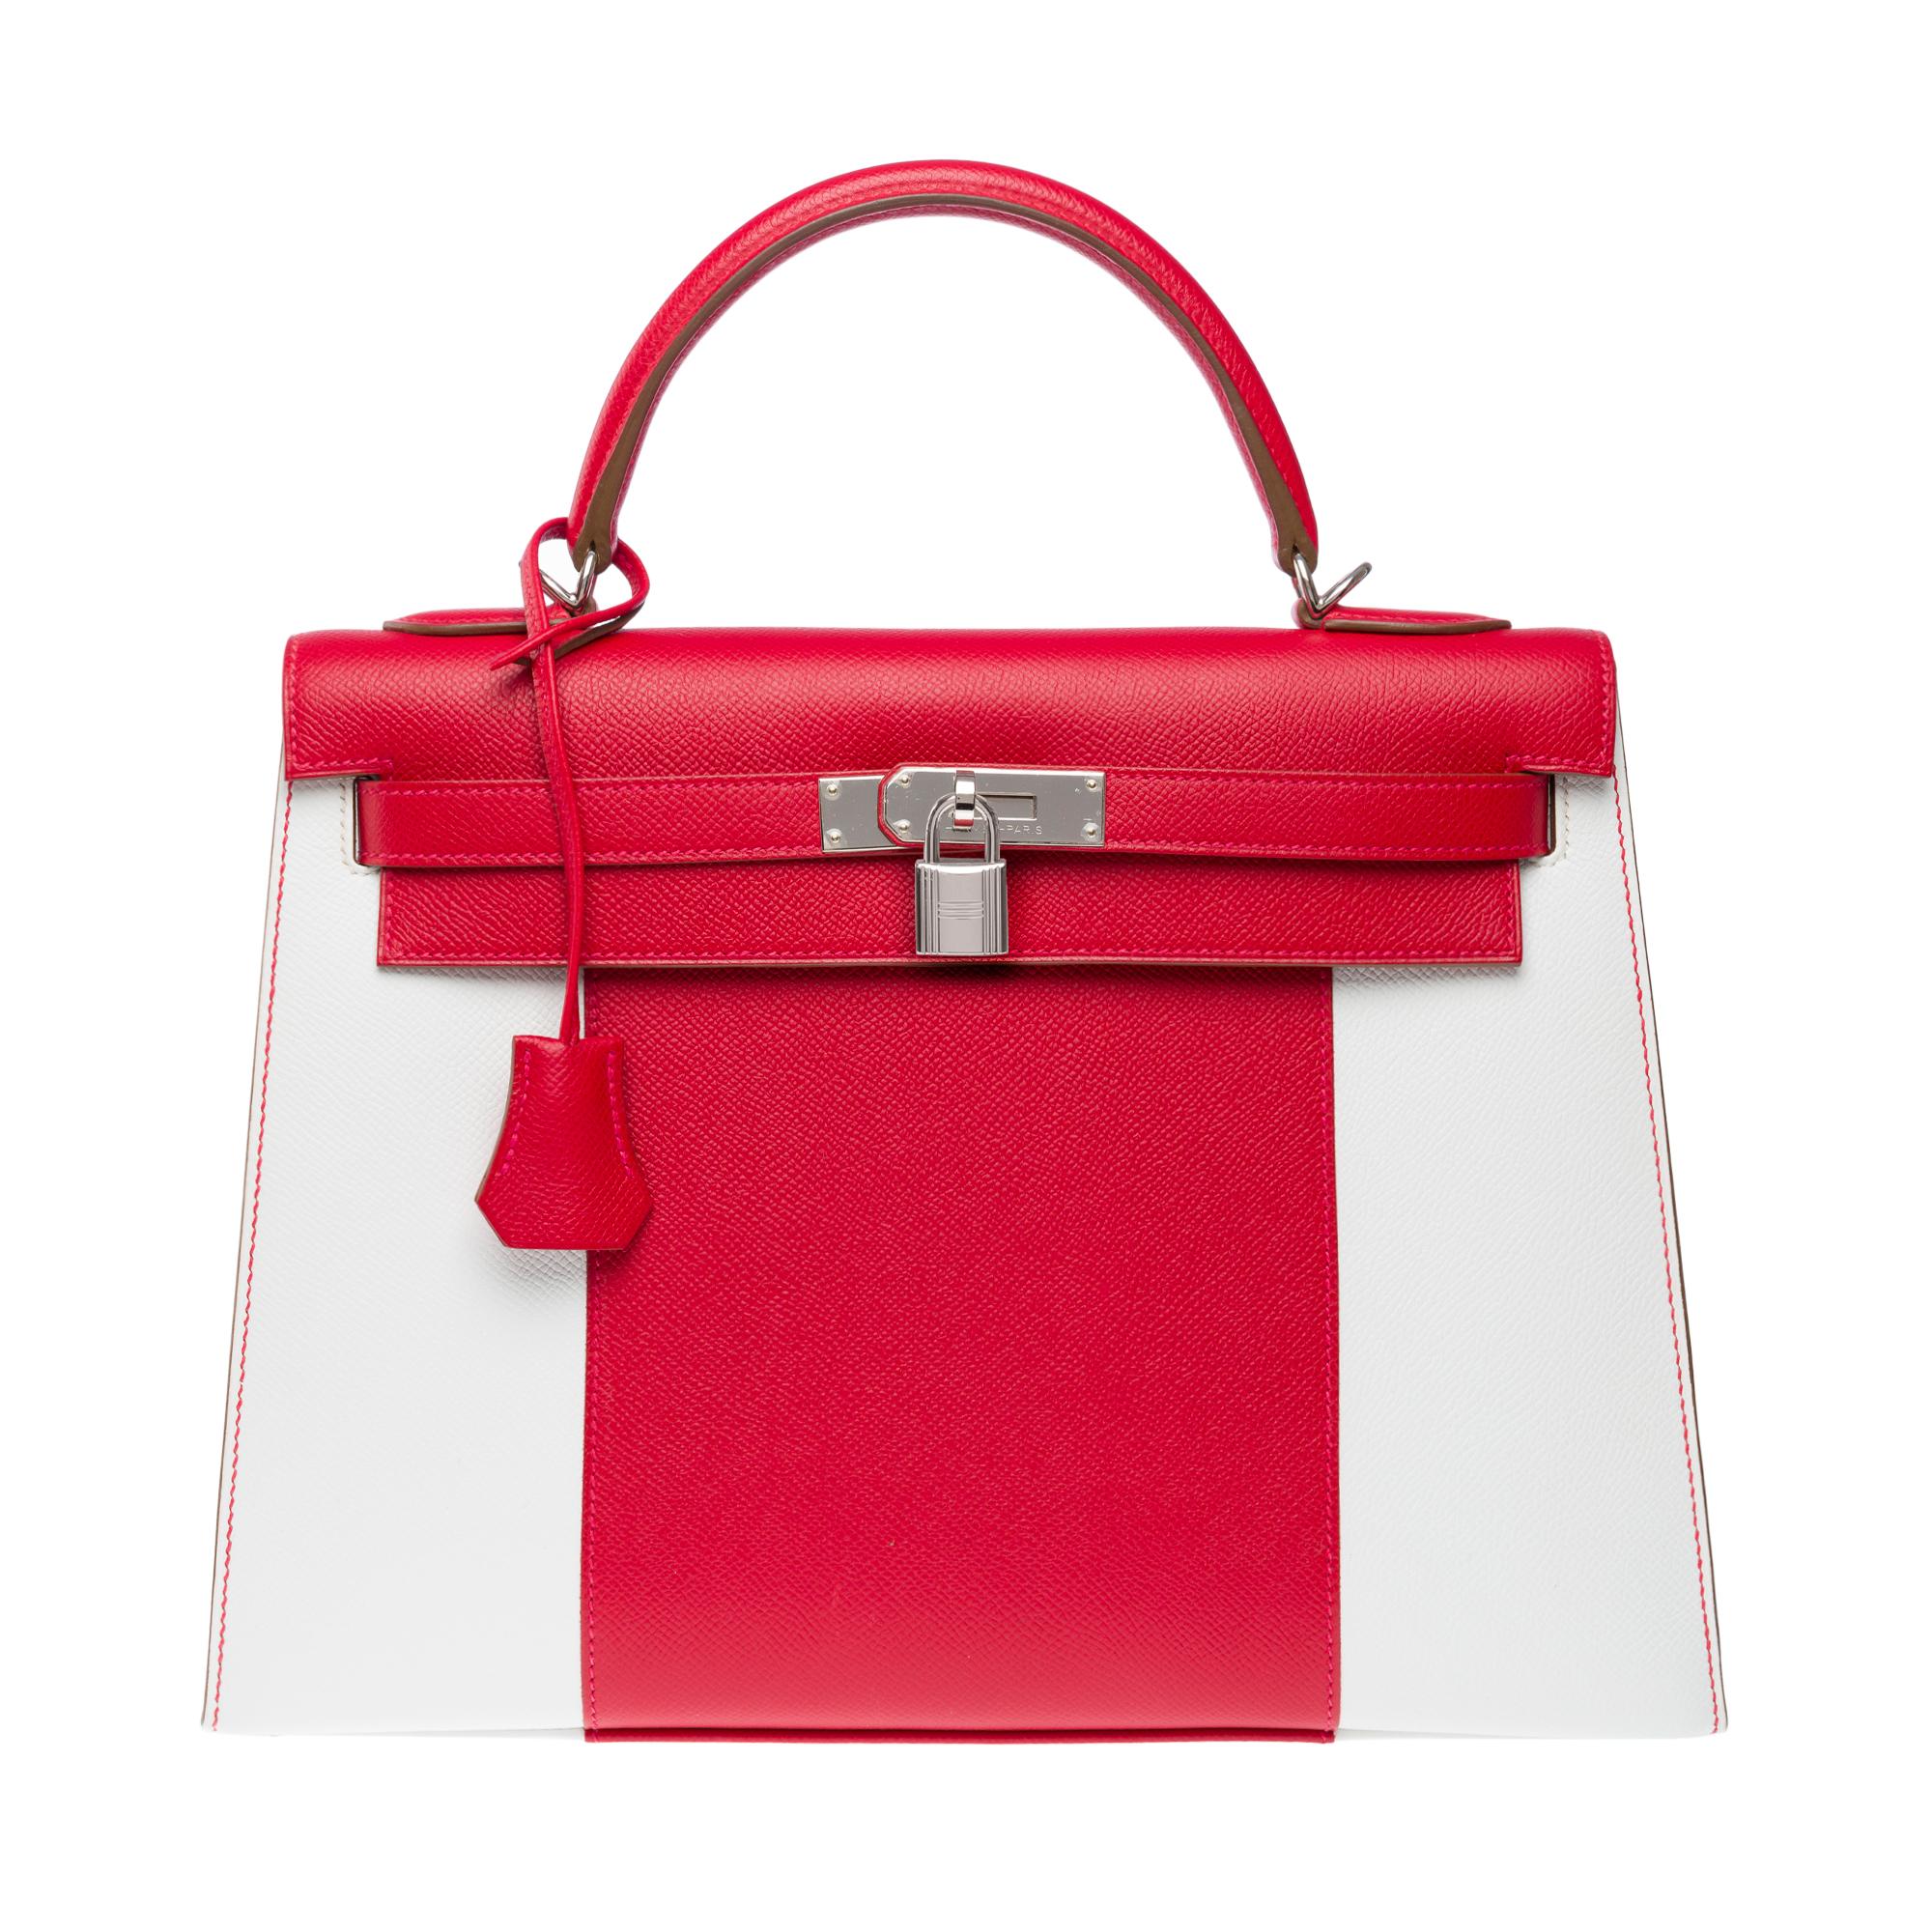 Red Flag limited edition Hermès Kelly 32  handbag strap in red and white epsom, PHW